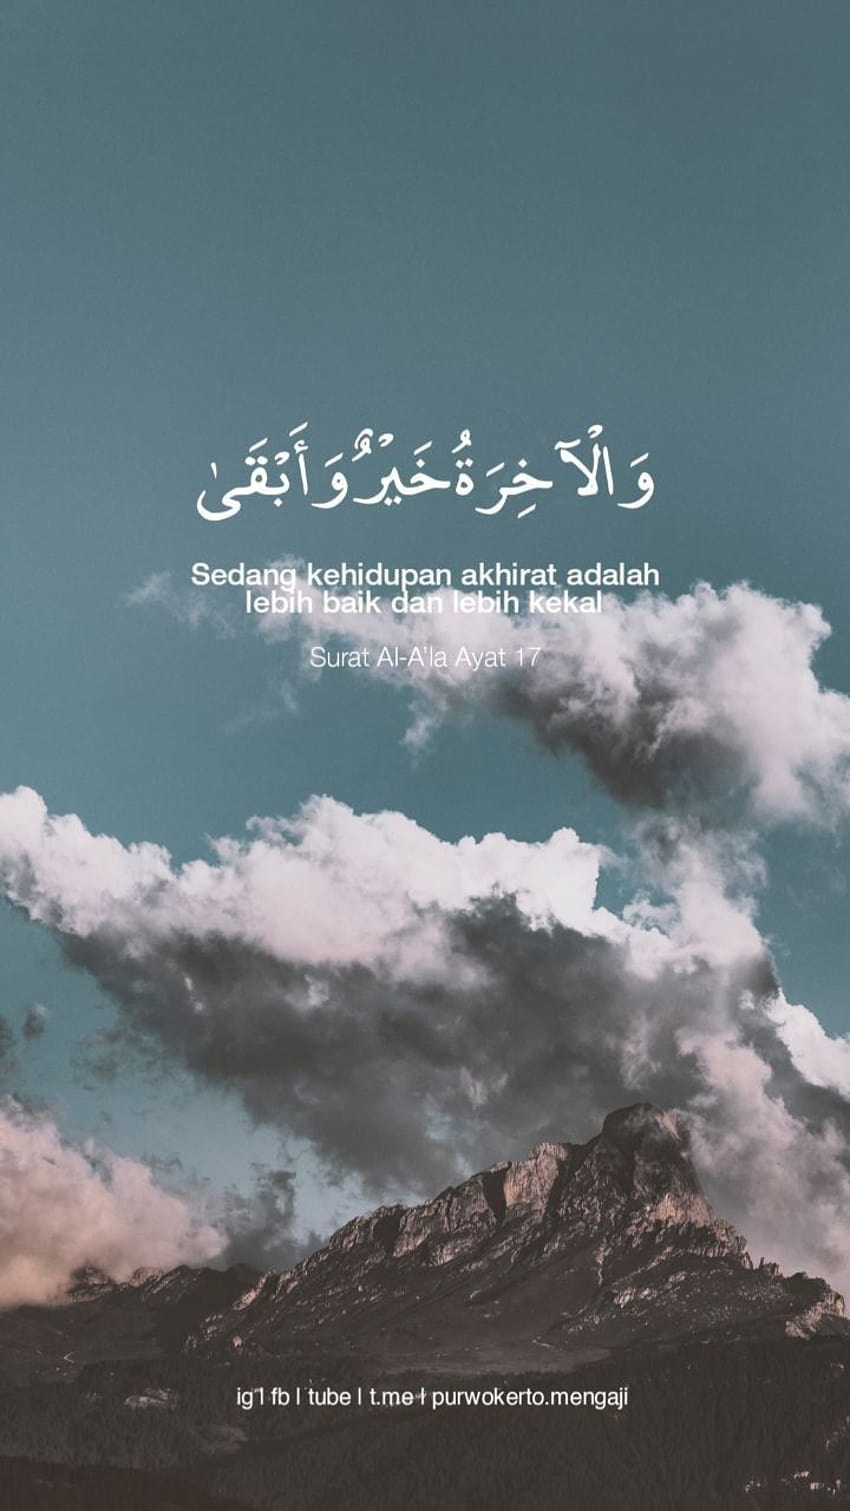 Quran Quotes posted by Ethan Anderson, quranic verses HD phone wallpaper